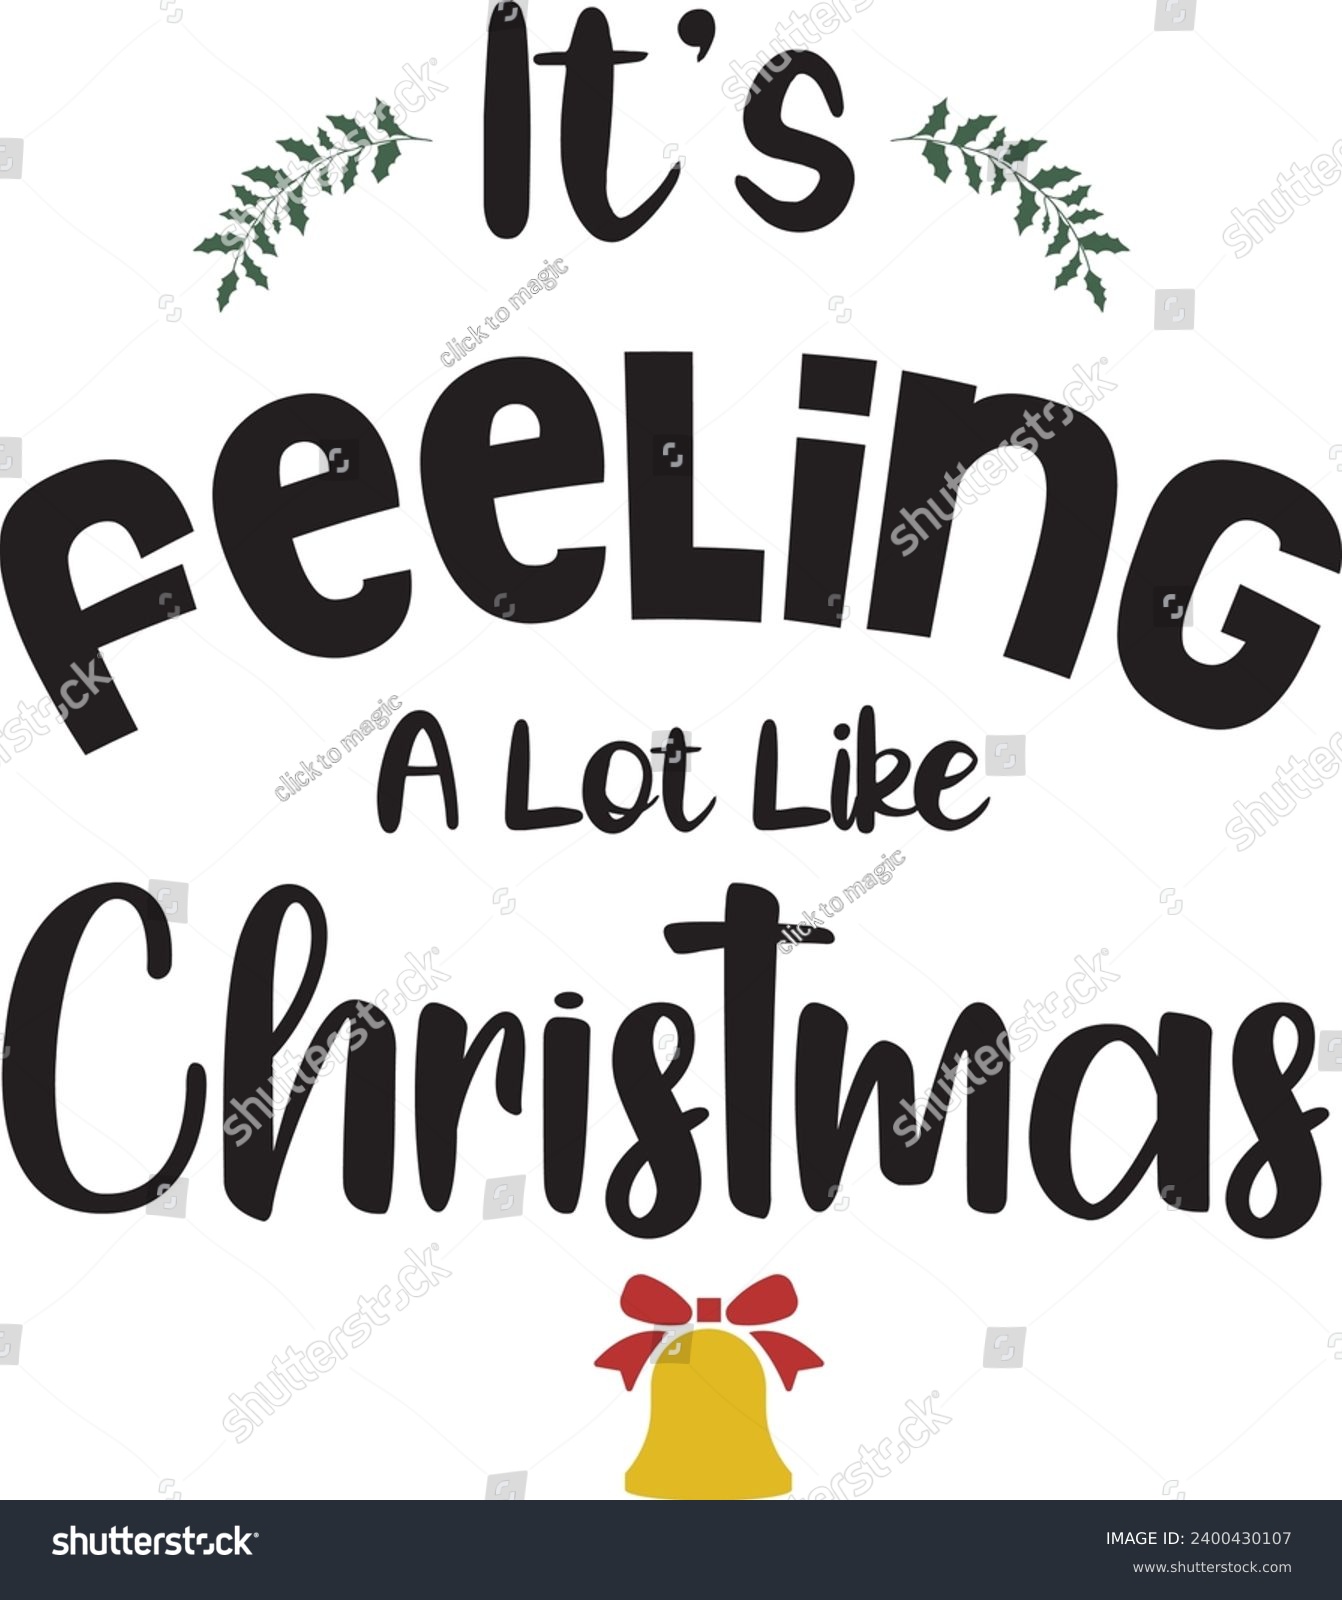 SVG of This is Merry Christmas, T-shirt Design, Files for Cutting, Isolated on white background, Winter Quote, Christmas Saying, Holiday EPS, T-shirt, Santa Claus Hat, New Year EPS, Snowflakes  svg